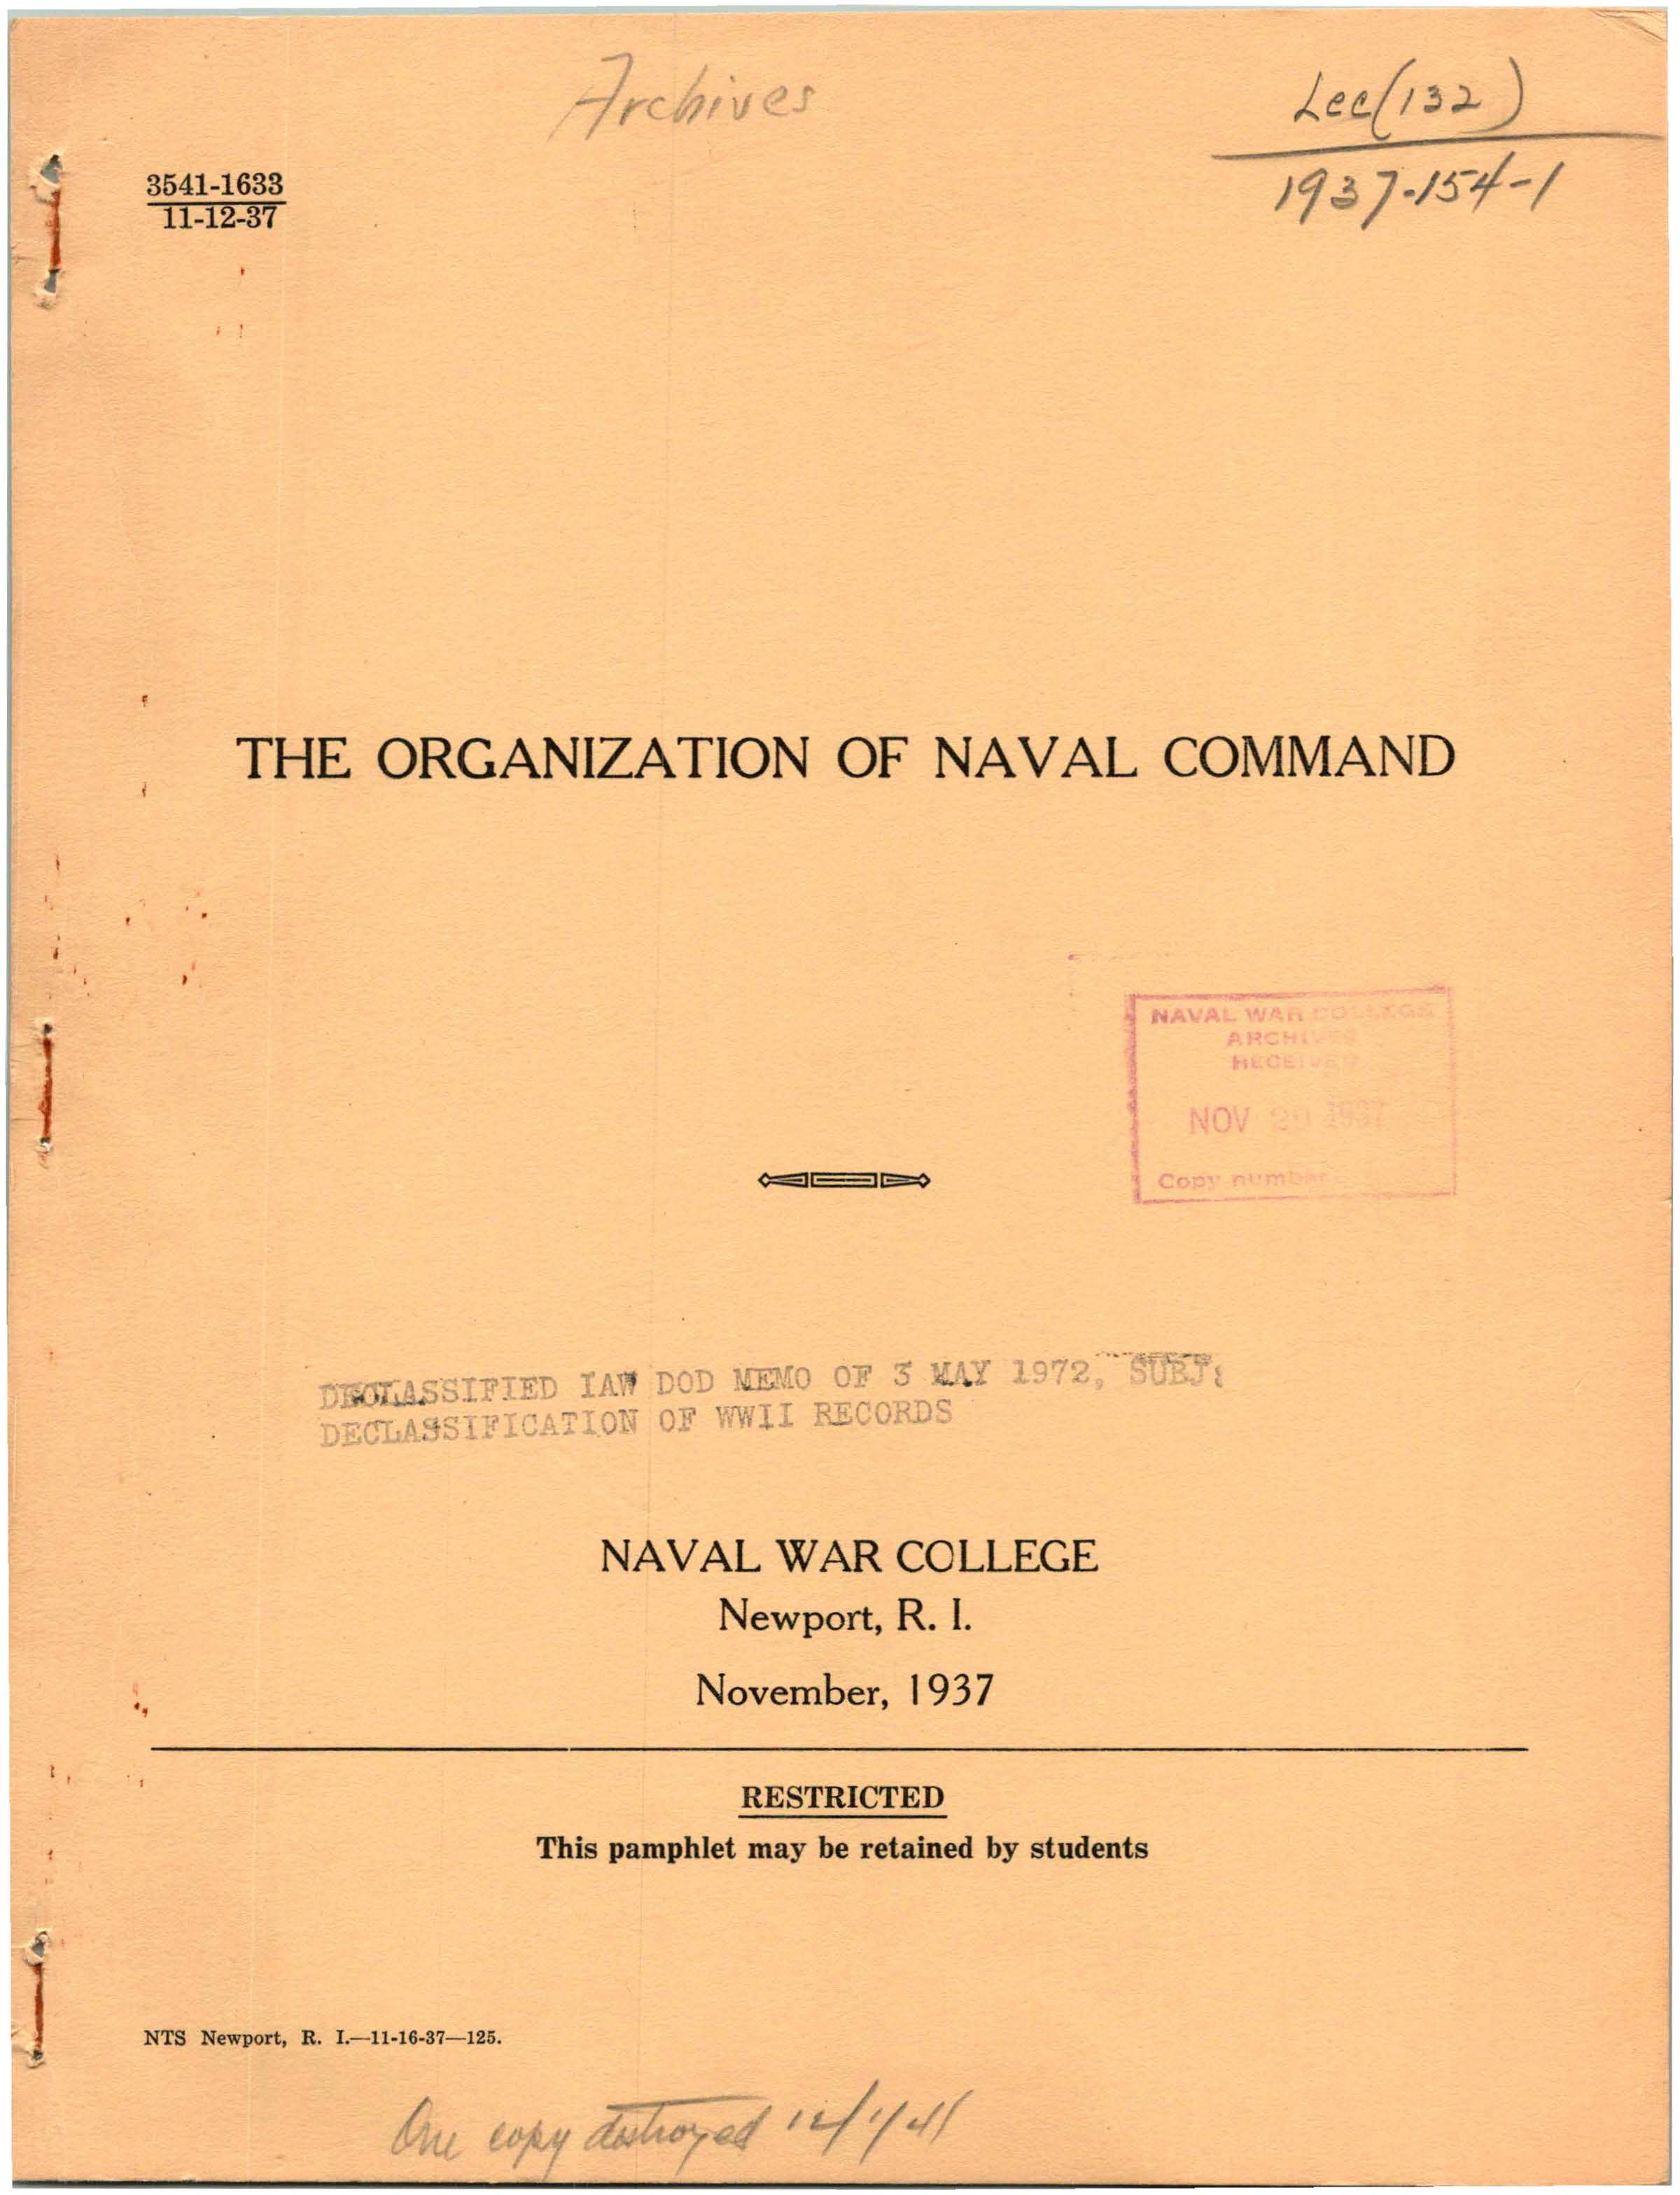 The Organization of Naval Command, by Richmond K. Turner